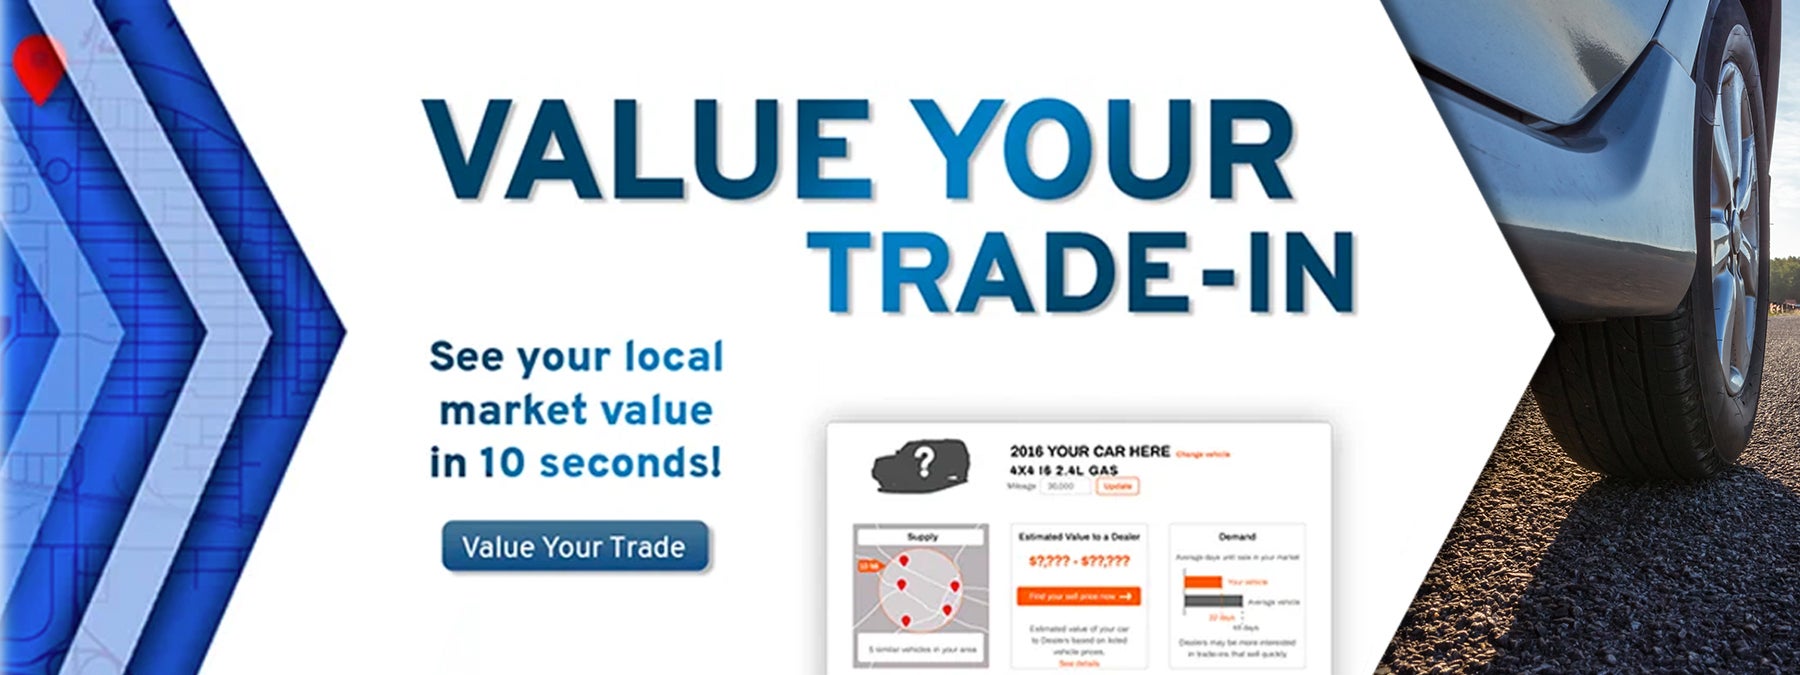 Value your trade